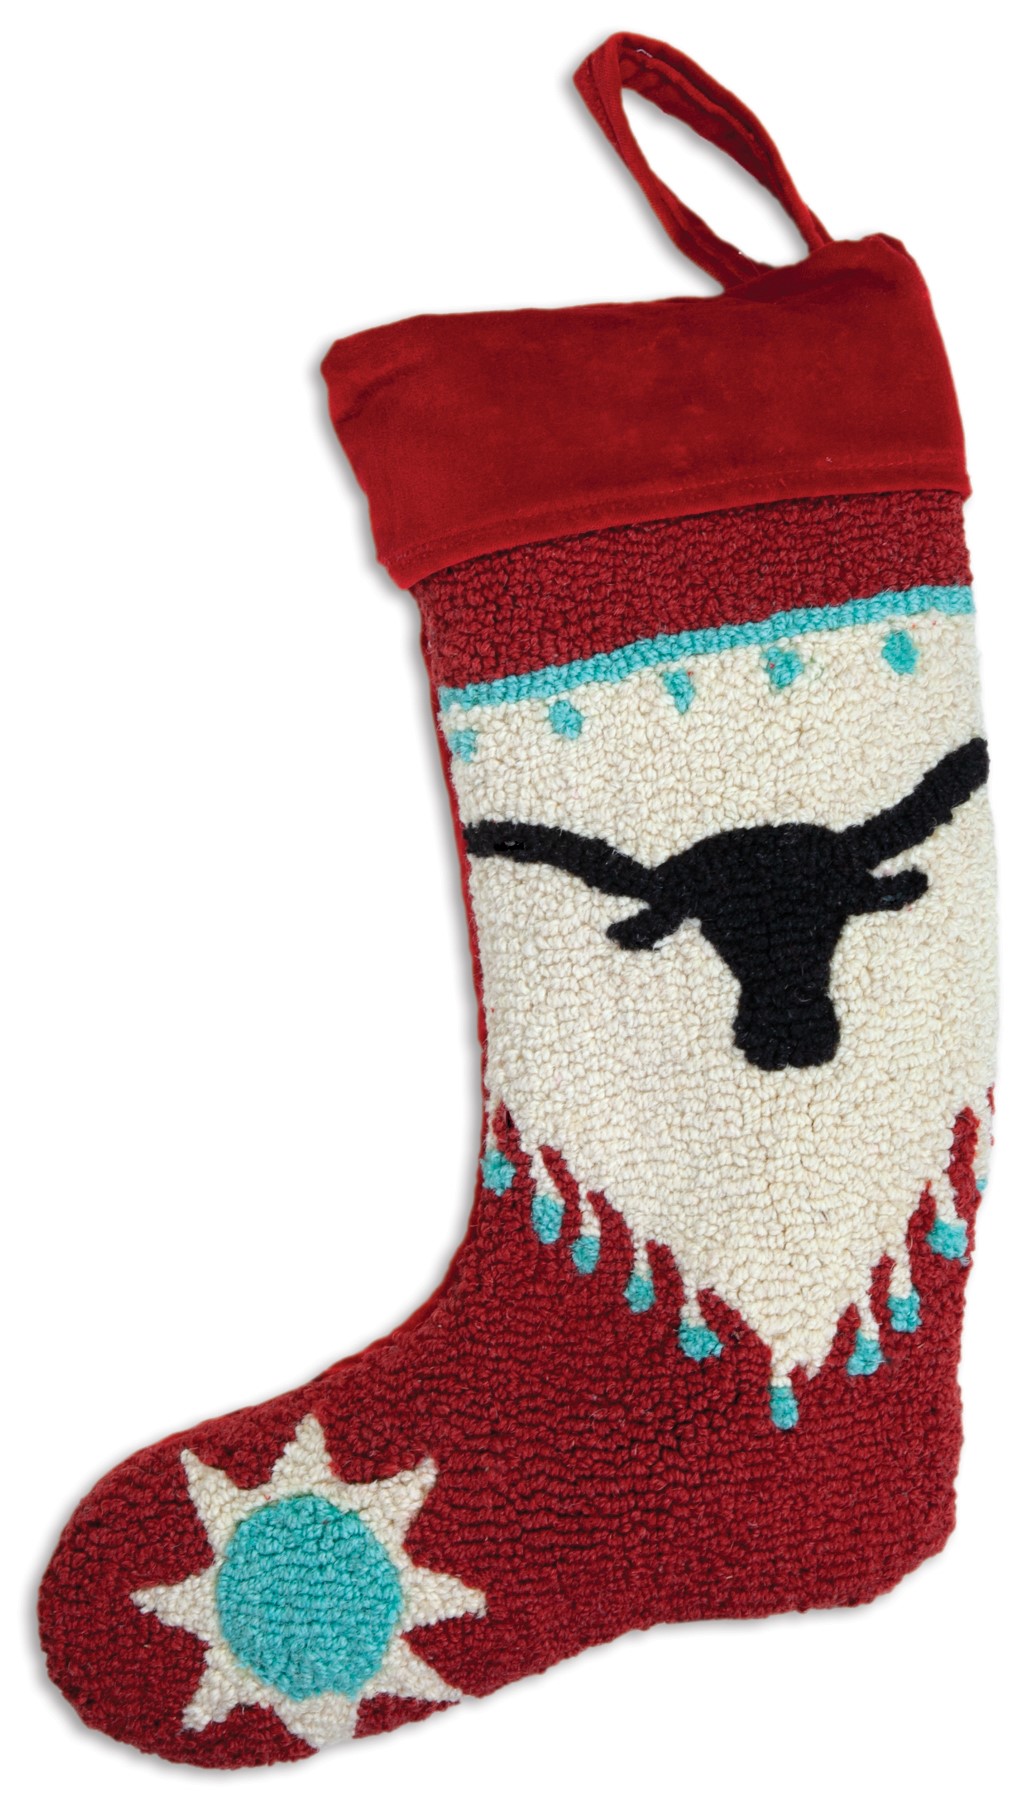 Picture of Longhorn Stocking